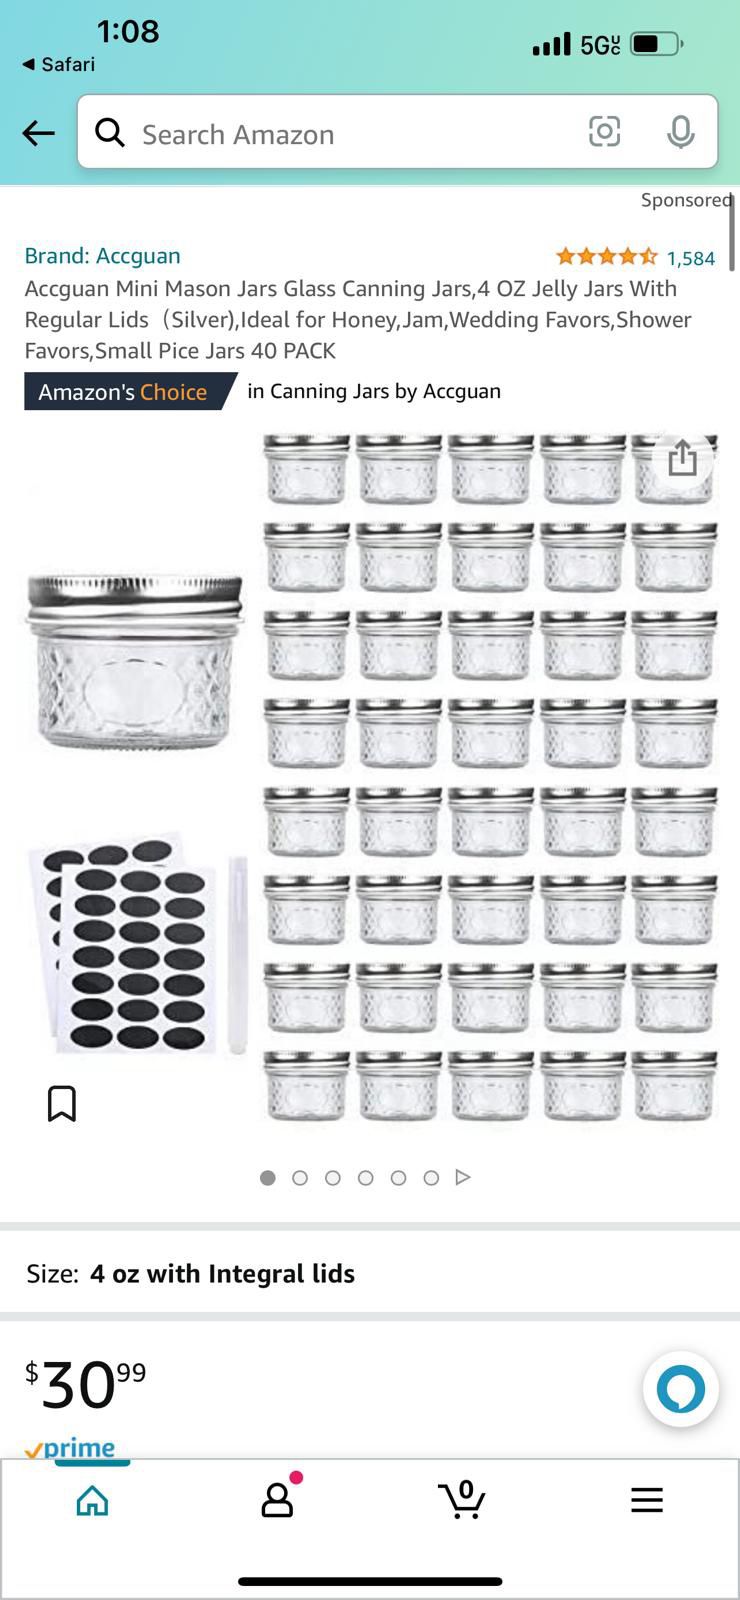 Accguan Mini Mason Jars Glass Canning Jars,4 OZ Jelly Jars With Regular Lids（Silver),Ideal for Honey,Jam,Wedding Favors,Shower Favors,Small Pice Jars 